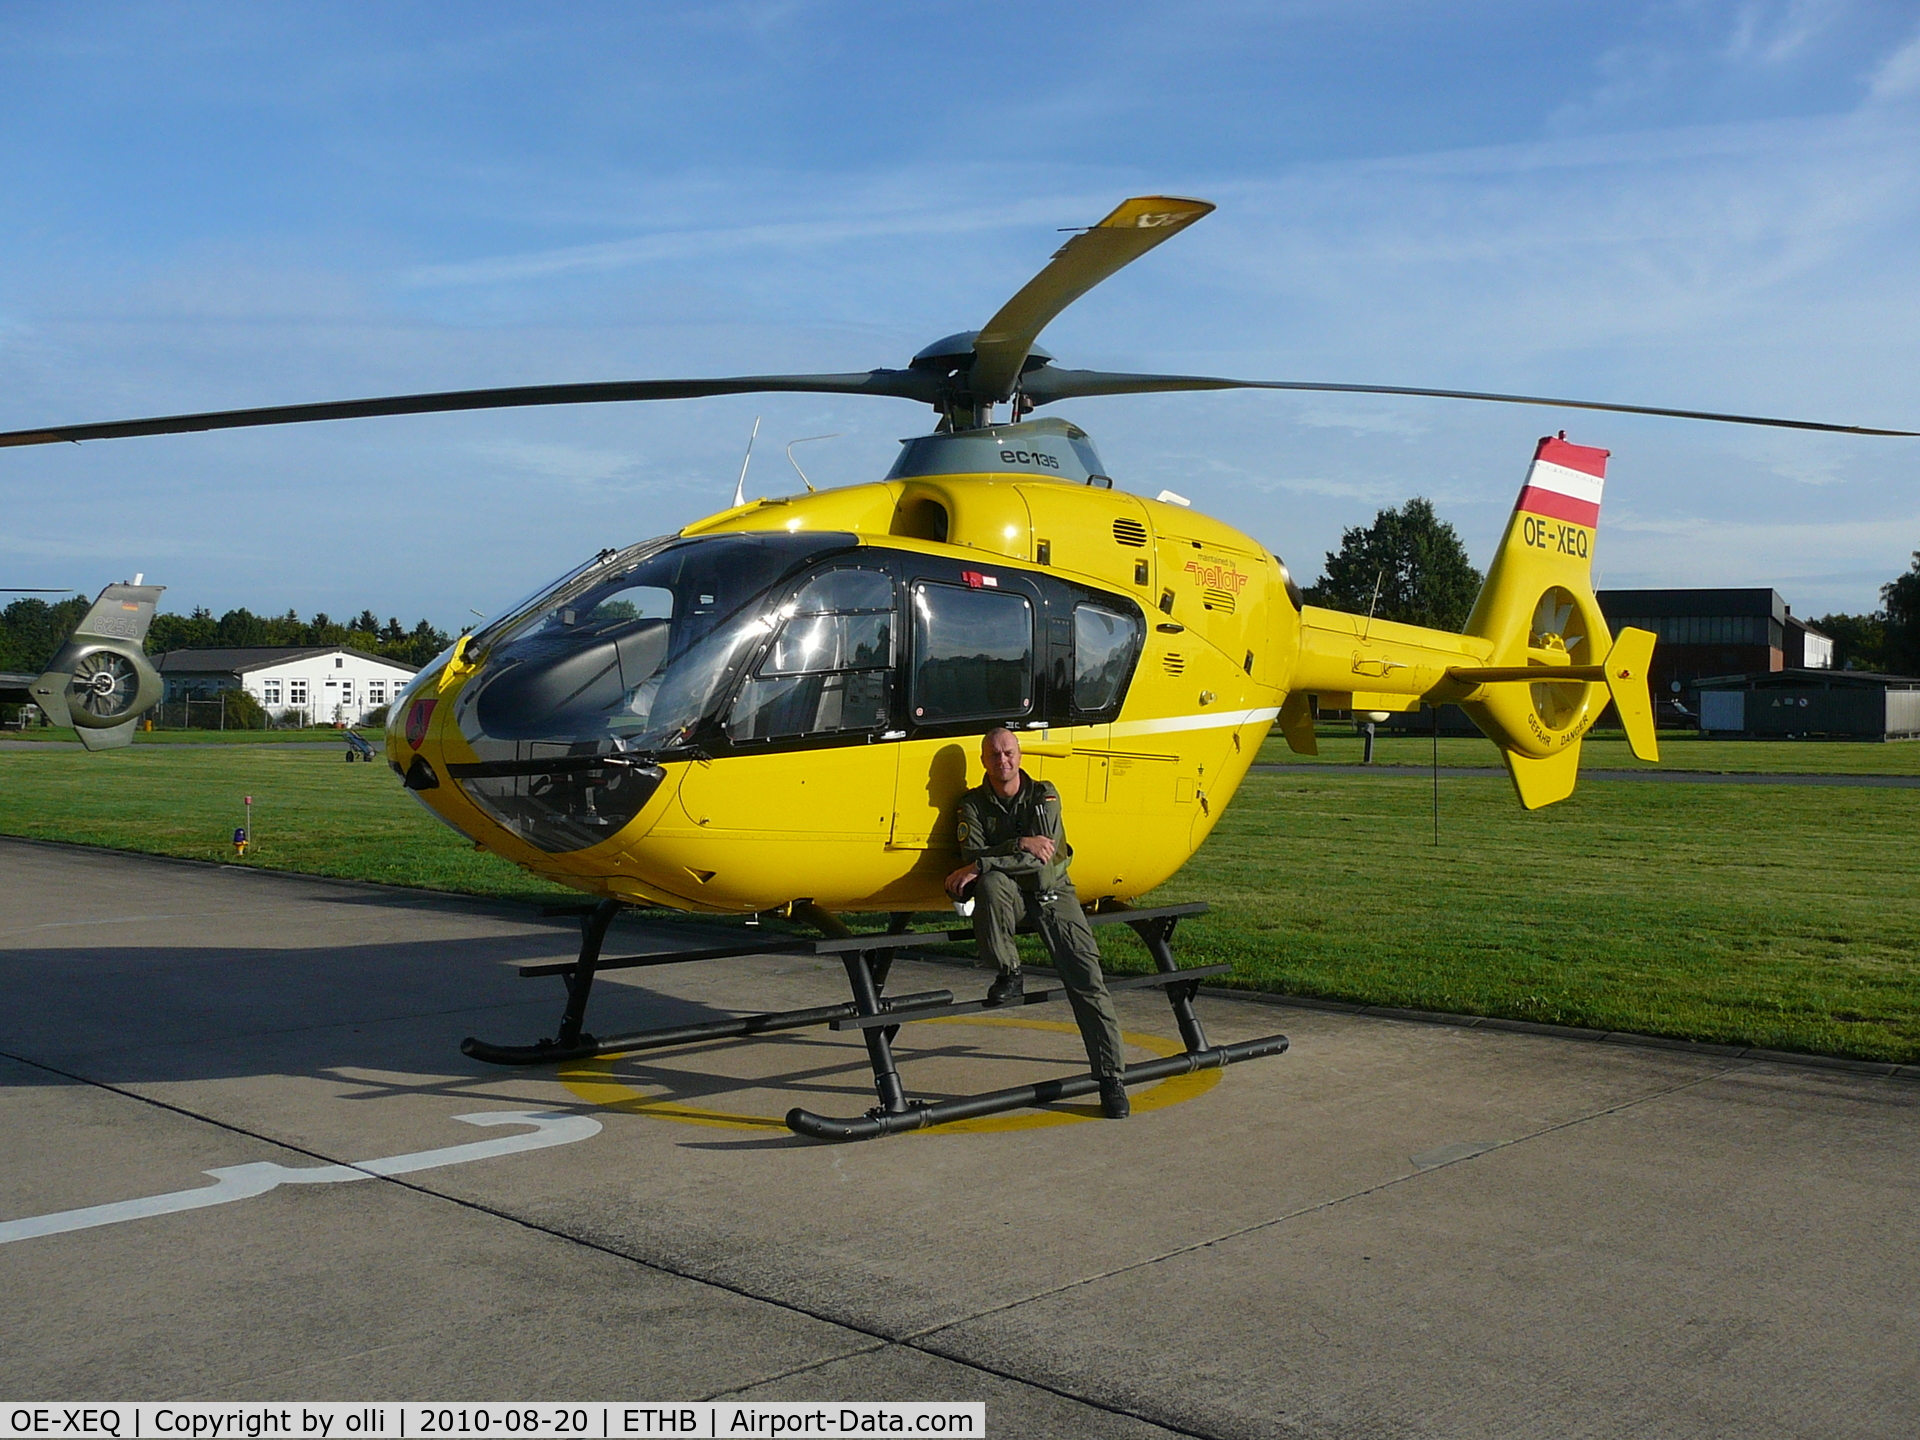 OE-XEQ, 2002 Eurocopter EC-135T-2 C/N 0220, T2+ during training switch course at bückeburg